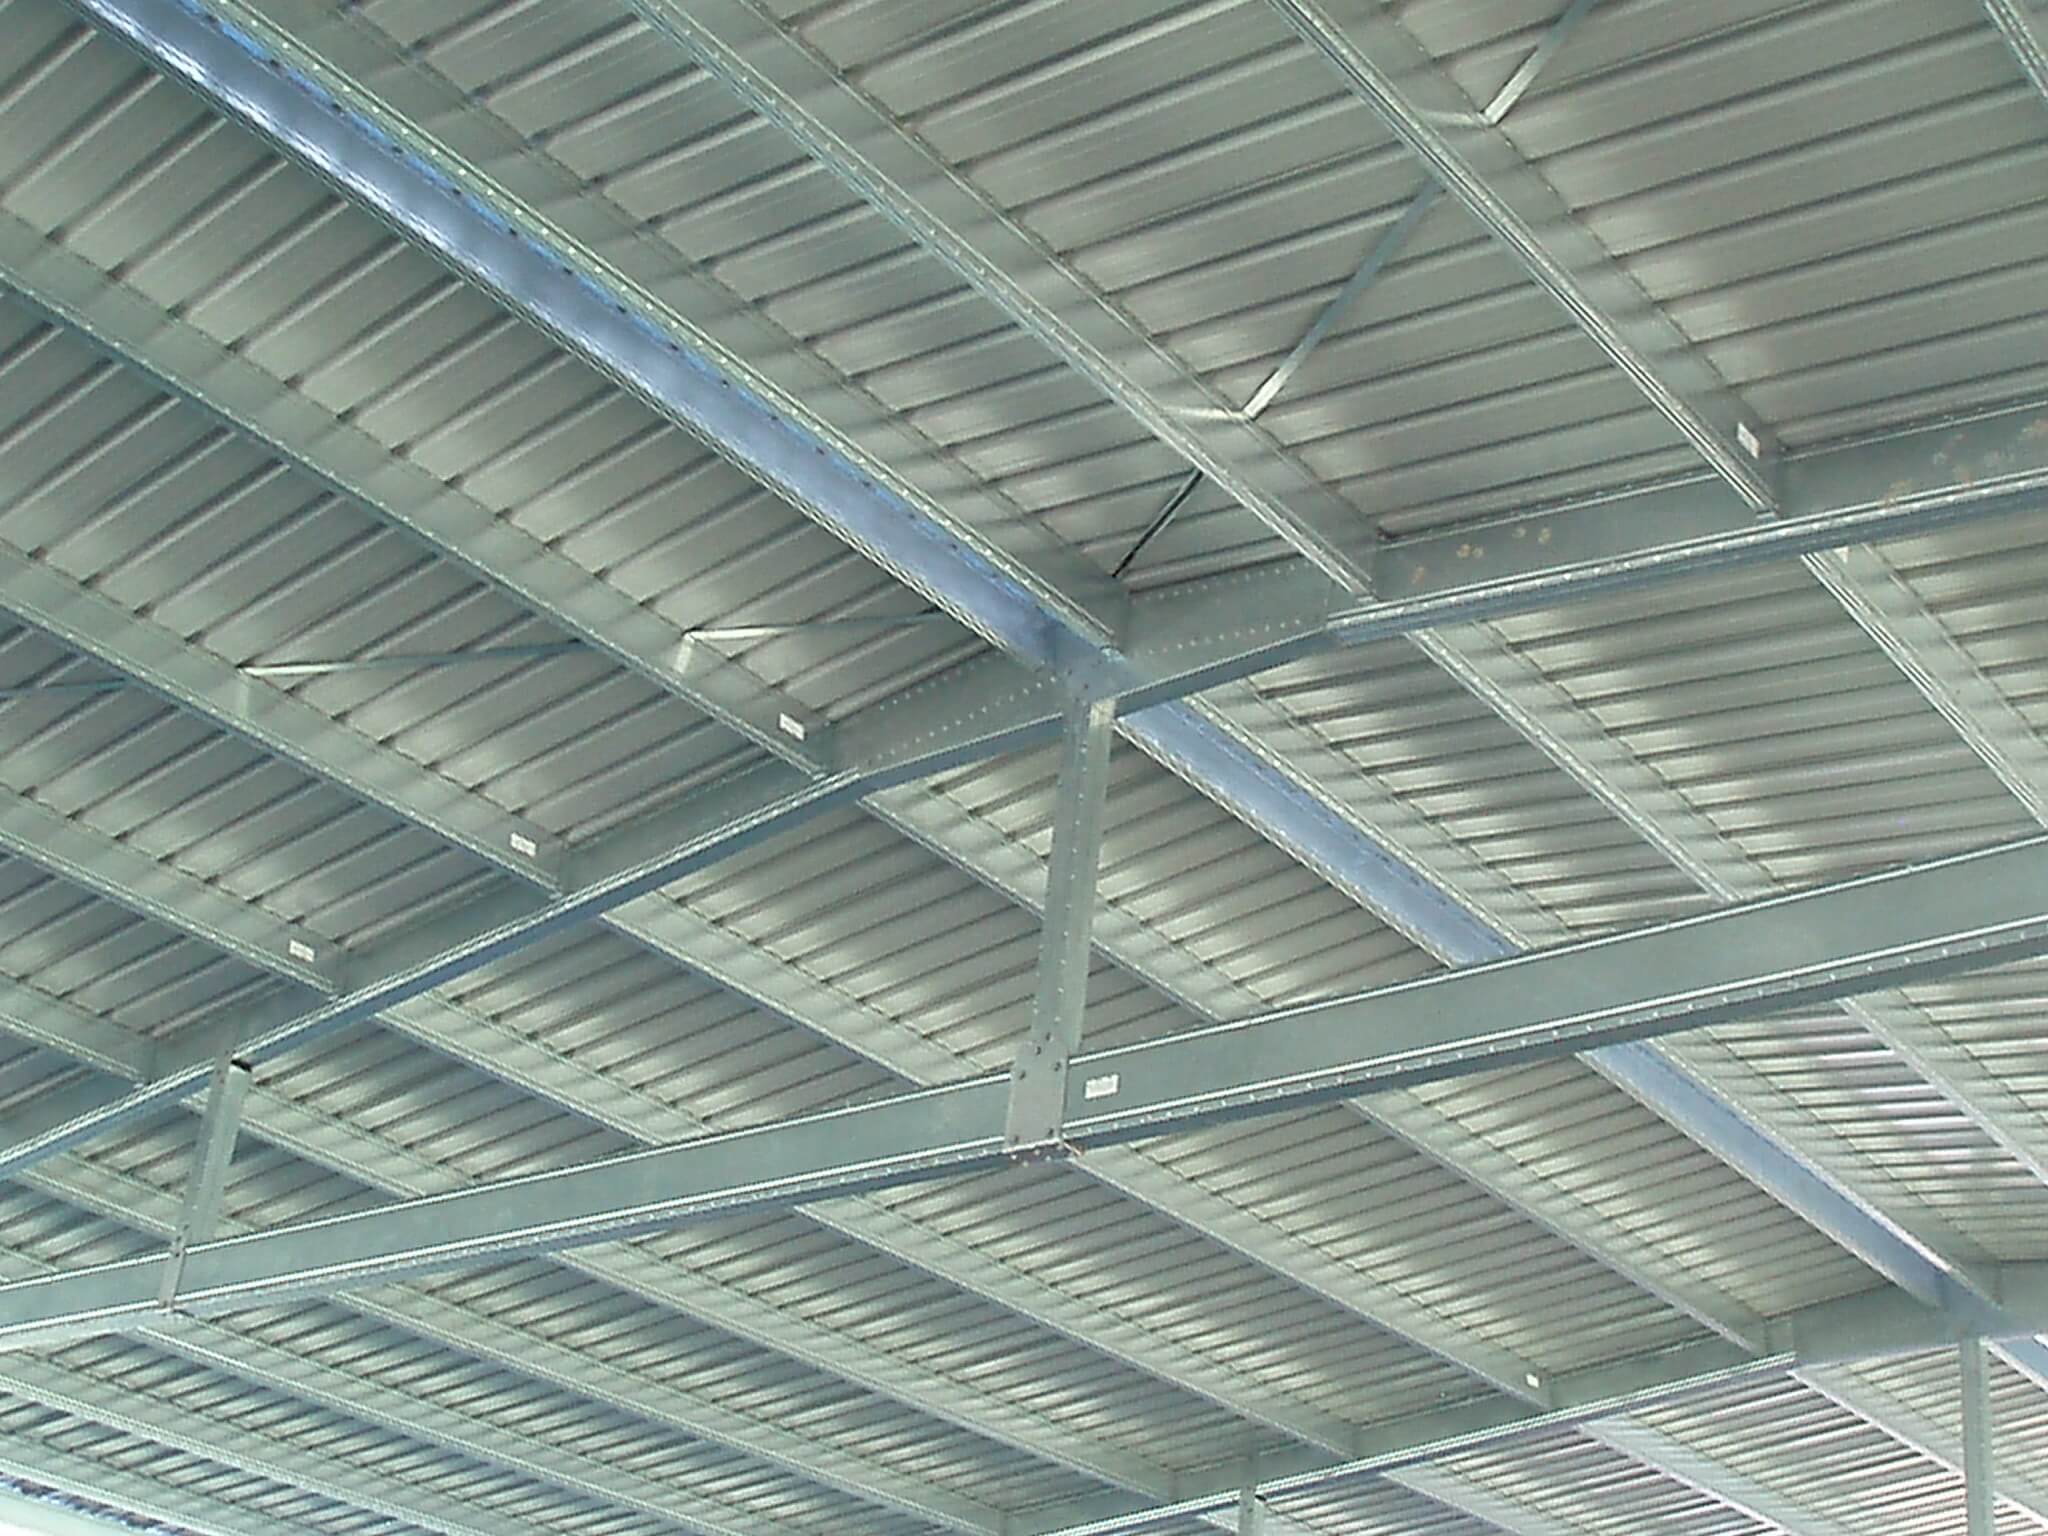 Wide spanning Boxspan roof trusses for industrial and commercial sheds and factories